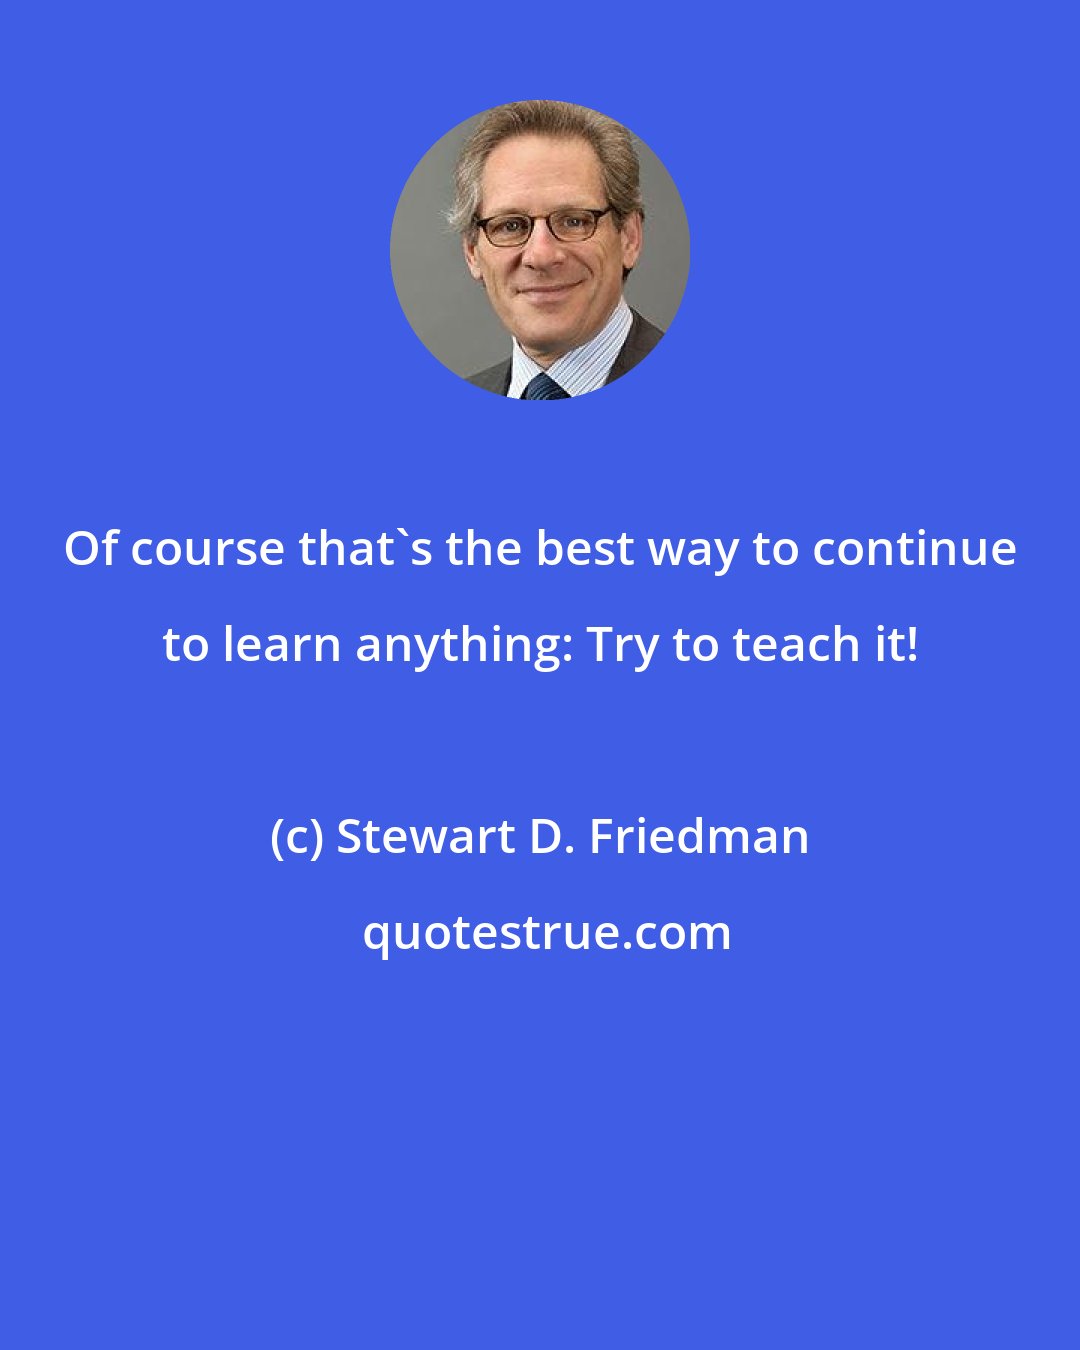 Stewart D. Friedman: Of course that's the best way to continue to learn anything: Try to teach it!